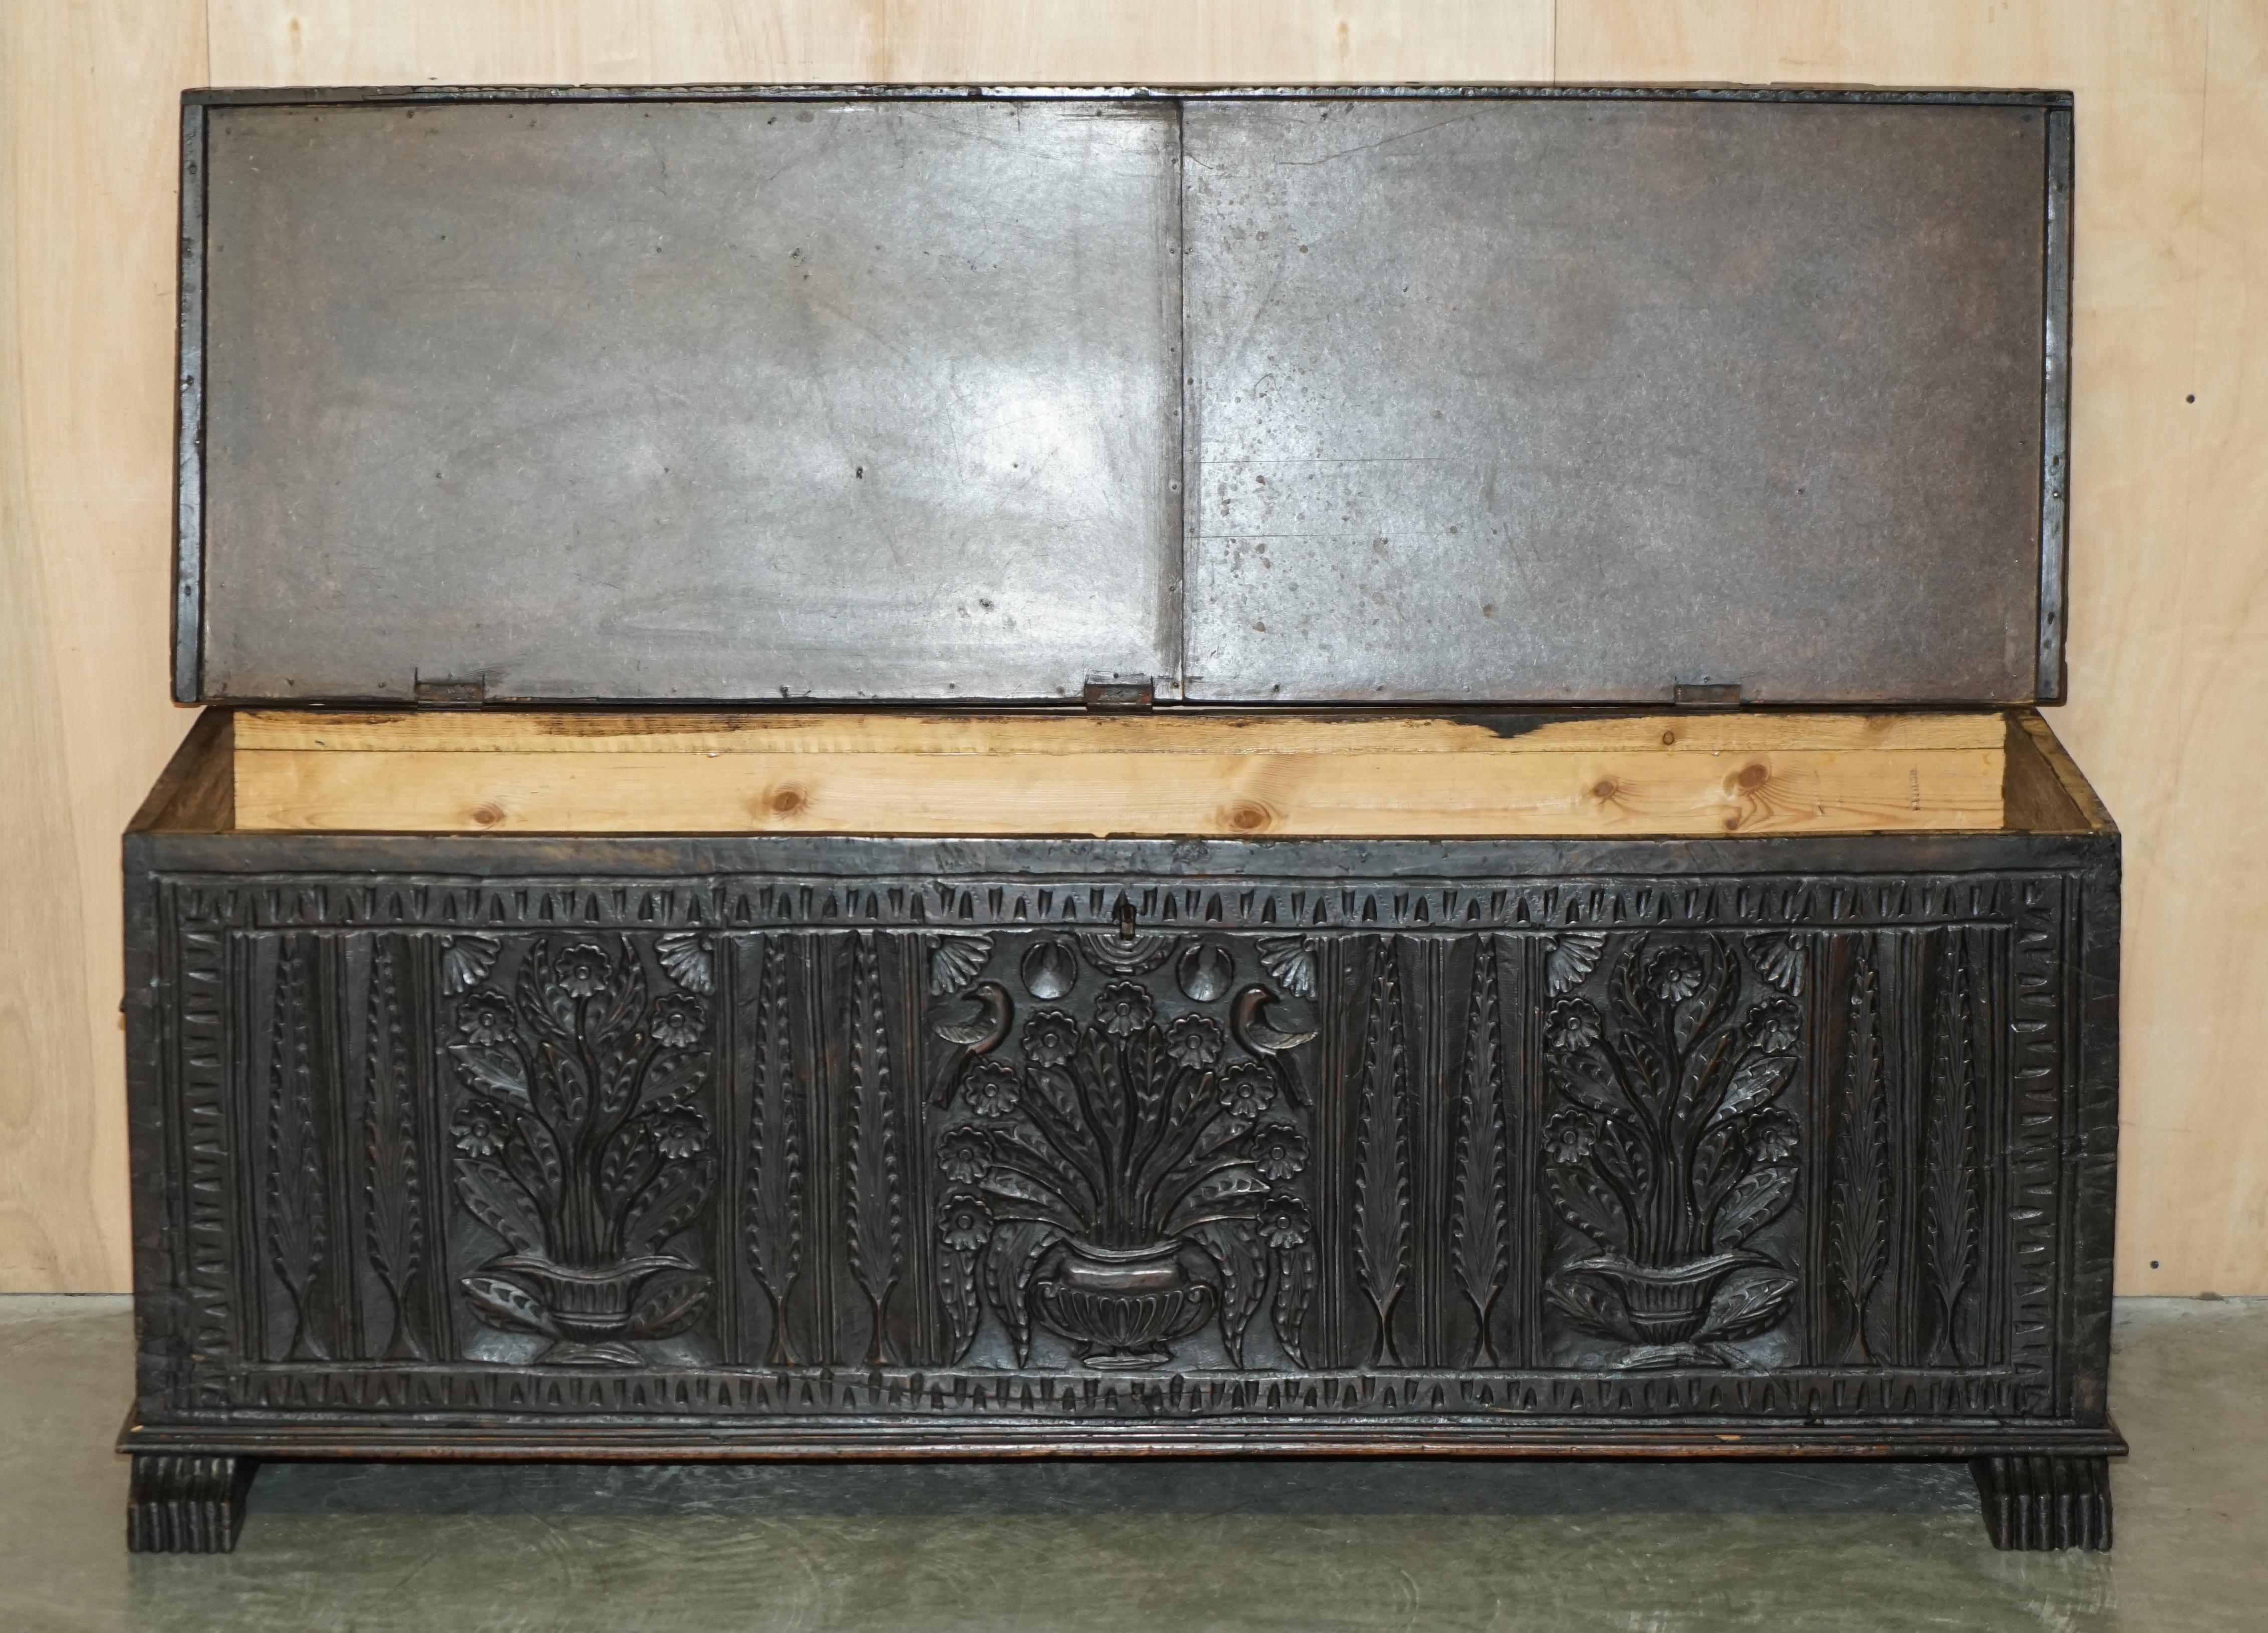 ANTIQUE 19TH CENTURY JACOBEAN REViVAL HAND CARVED TRUNK CHEST OTTOMAN im Angebot 12